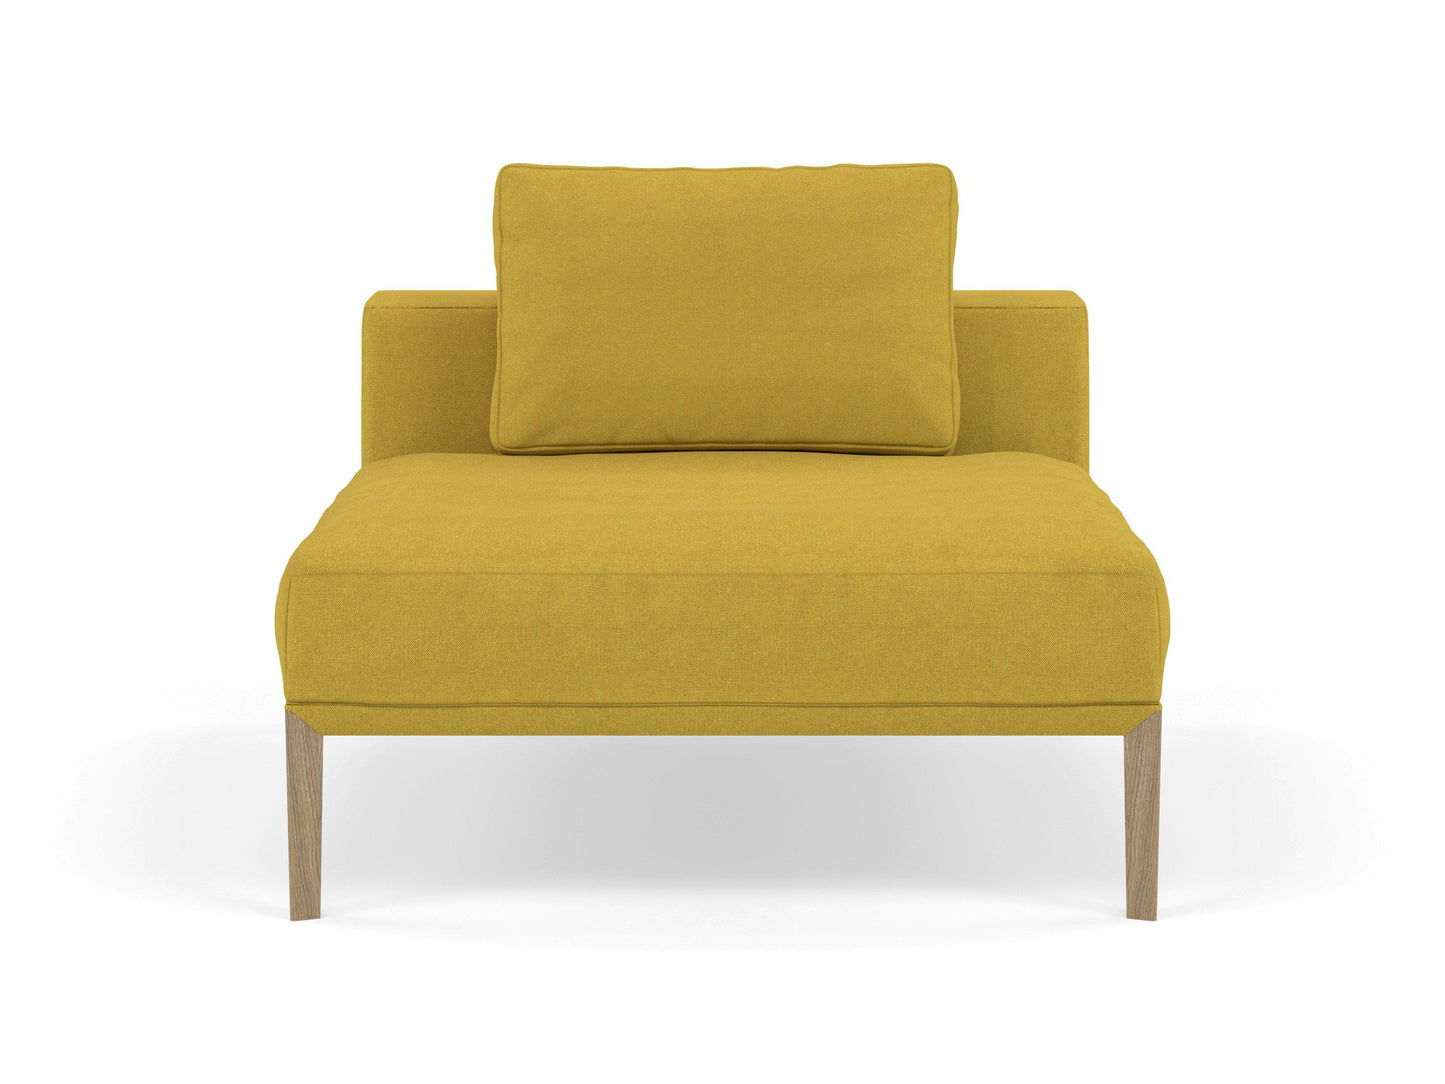 Modern Armchair 1 Seater Sofa without armrests in Vibrant Mustard Yellow Fabric-Natural Oak-Distinct Designs (London) Ltd